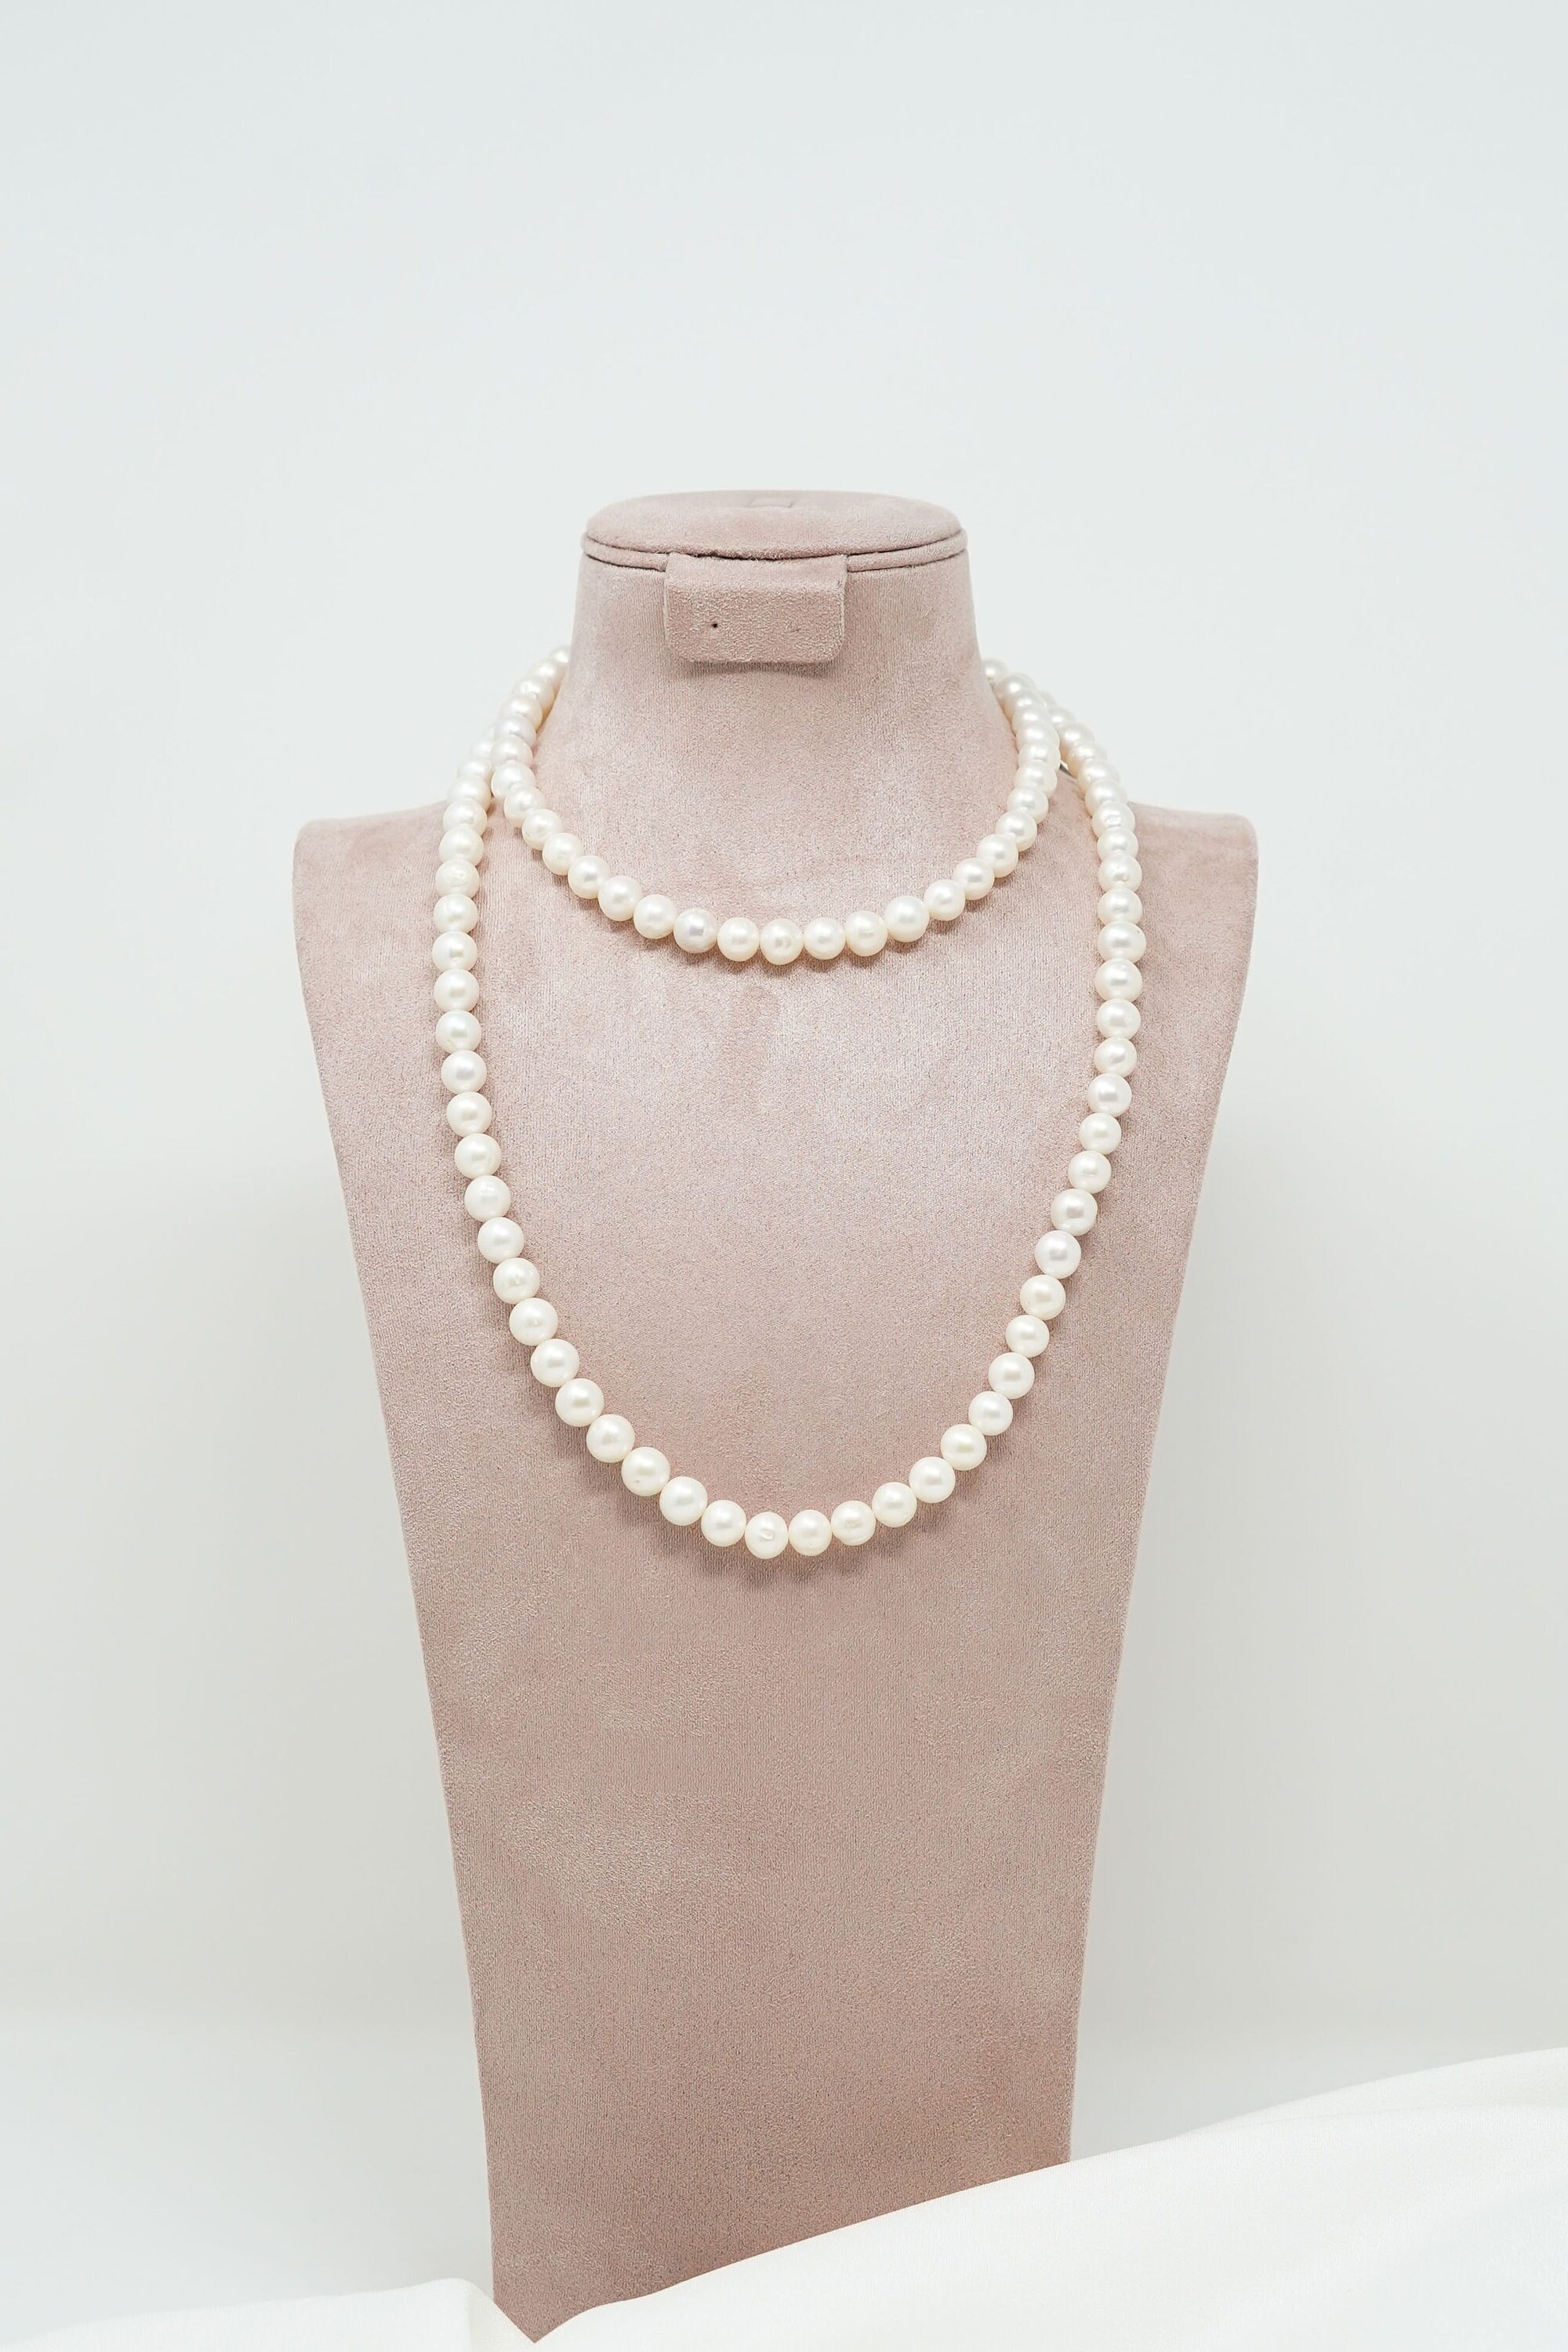 Explore the Timeless Elegance of Mikimoto Pearl Jewelry